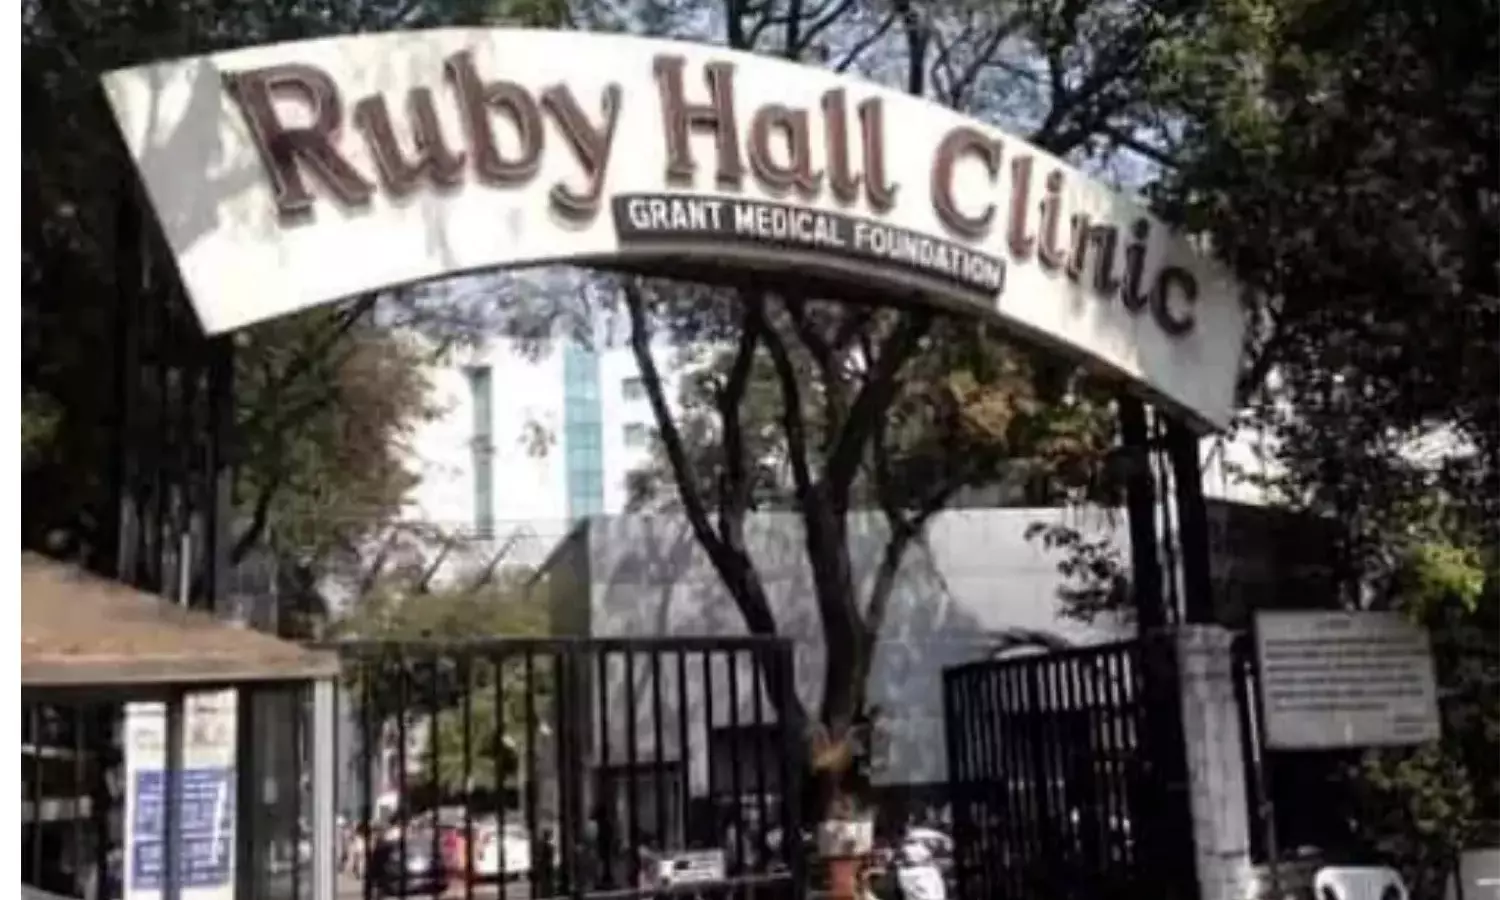 Ruby Hall clinic Director, Nephrologist, Urologist,12 others booked for malpractice in kidney transplant case